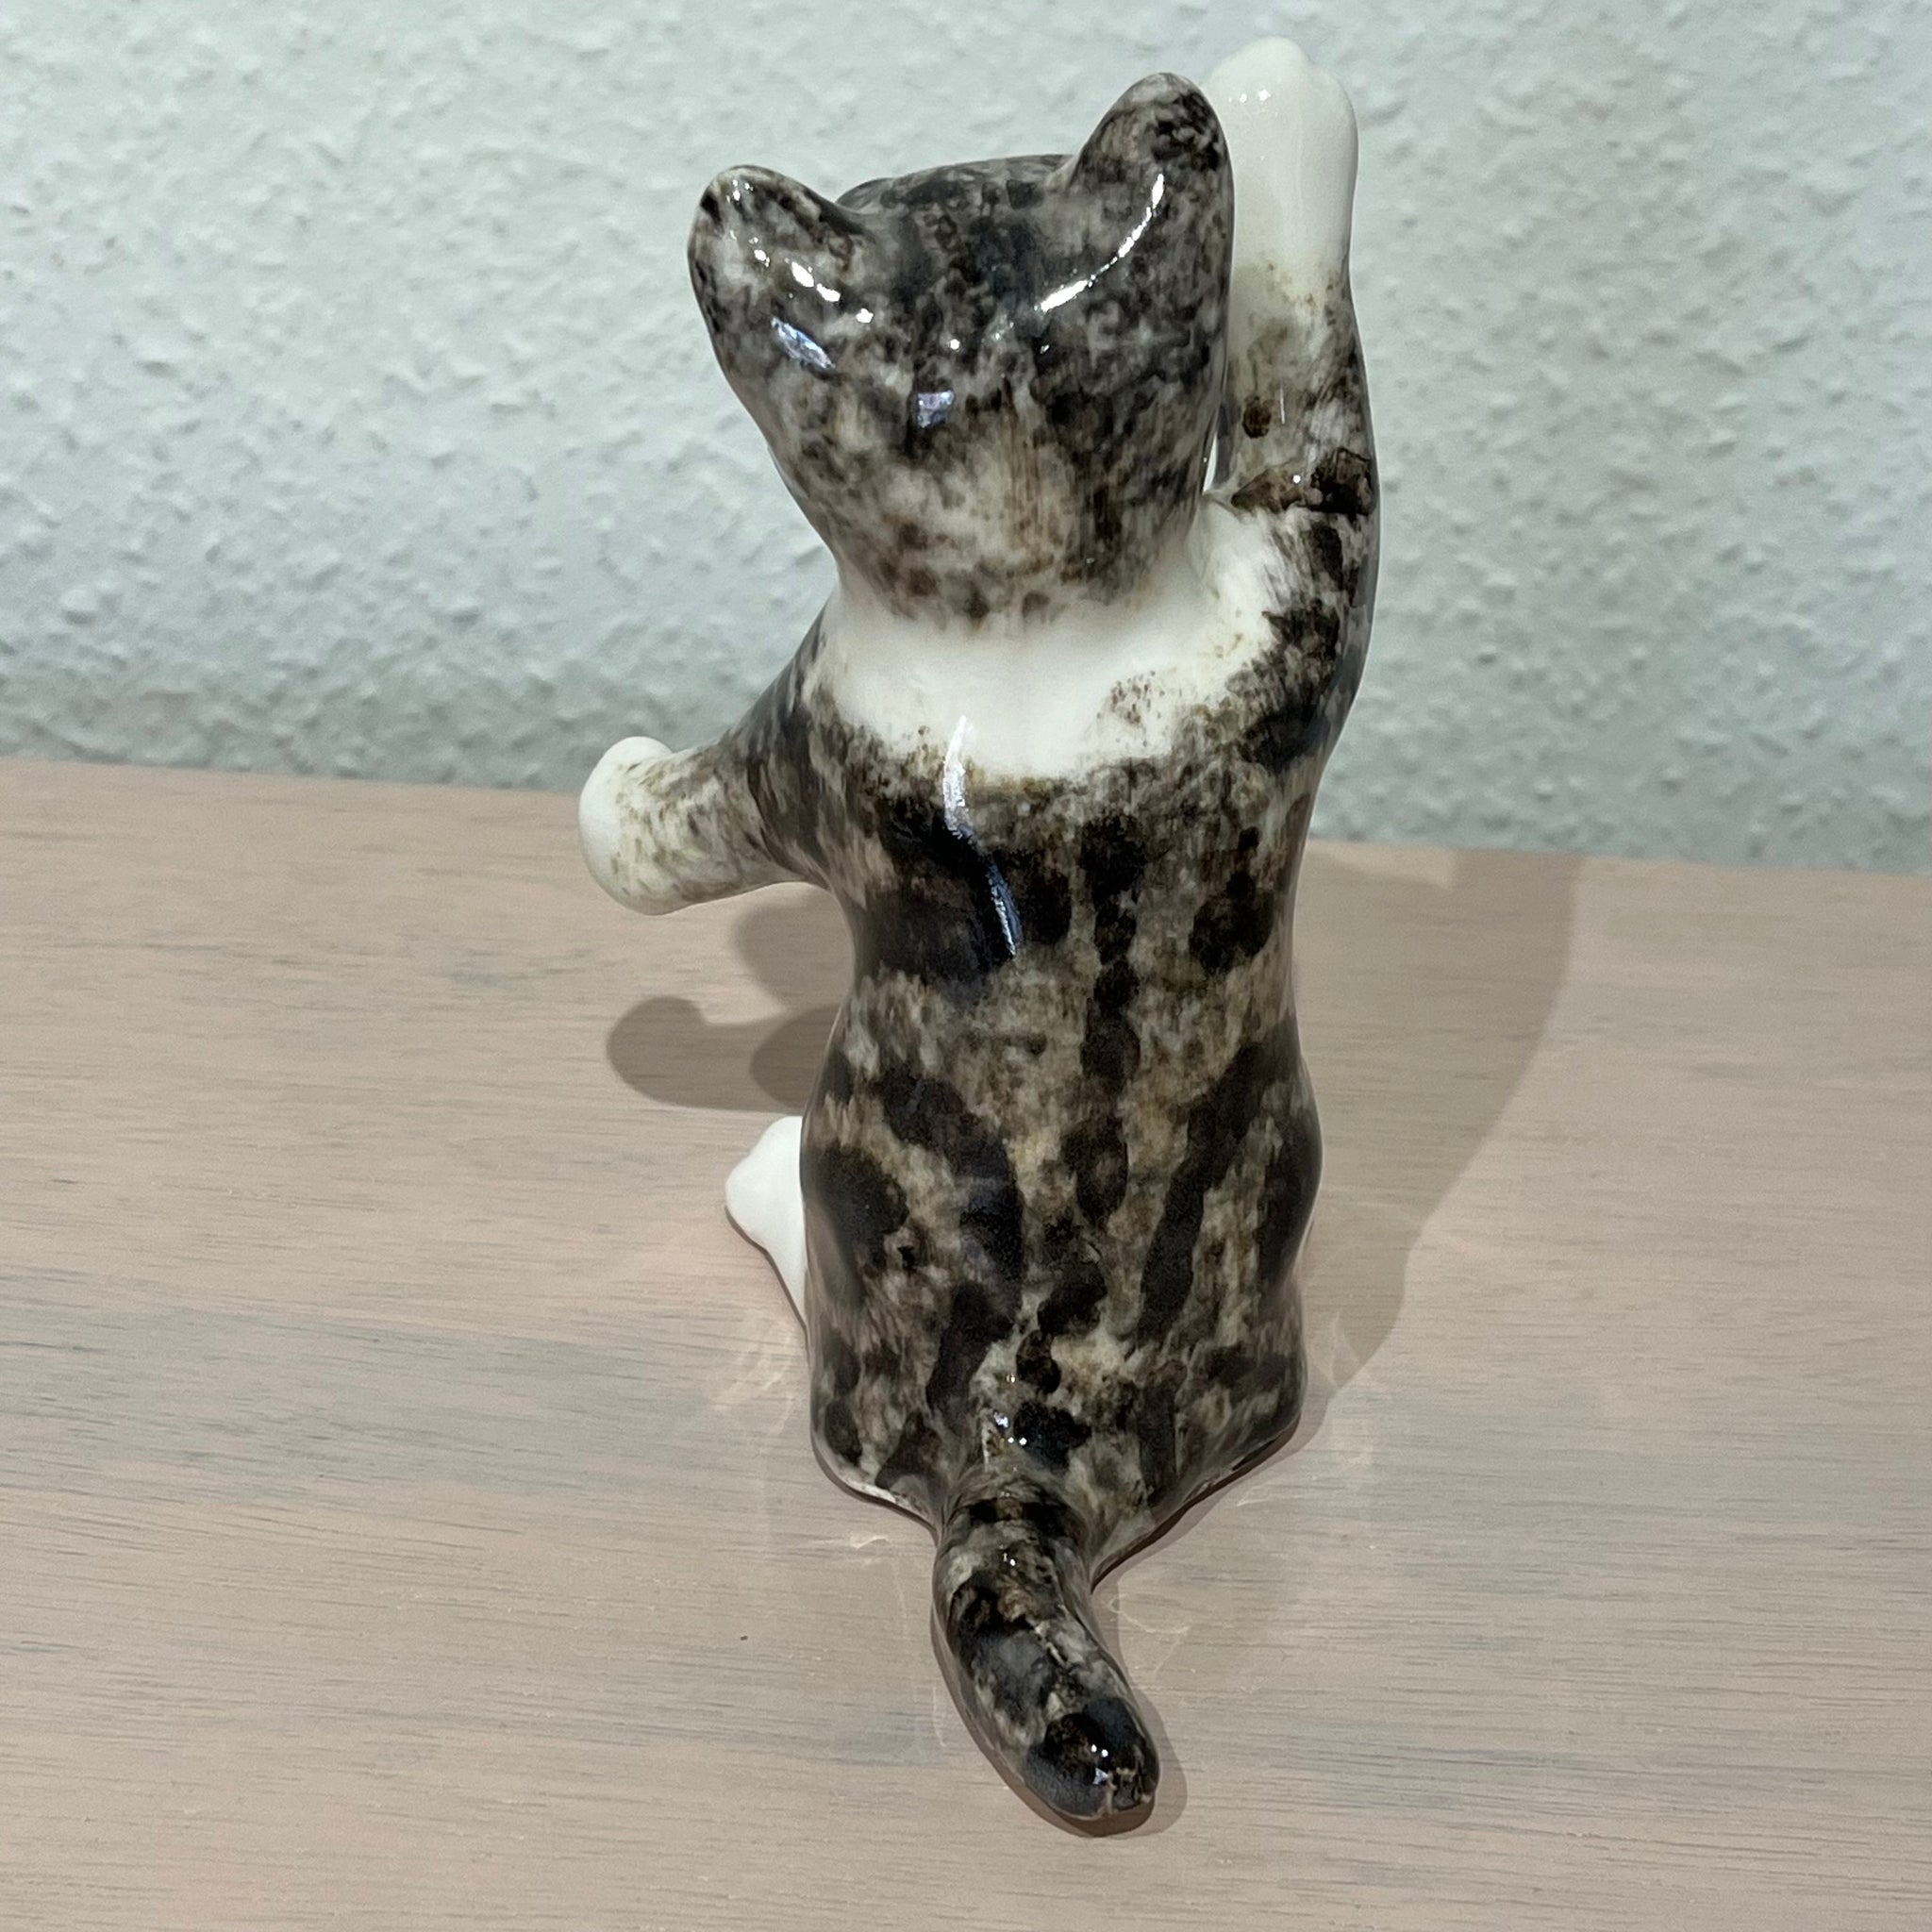 Grey and White Tabby Cat, Paw Raised - Size 2